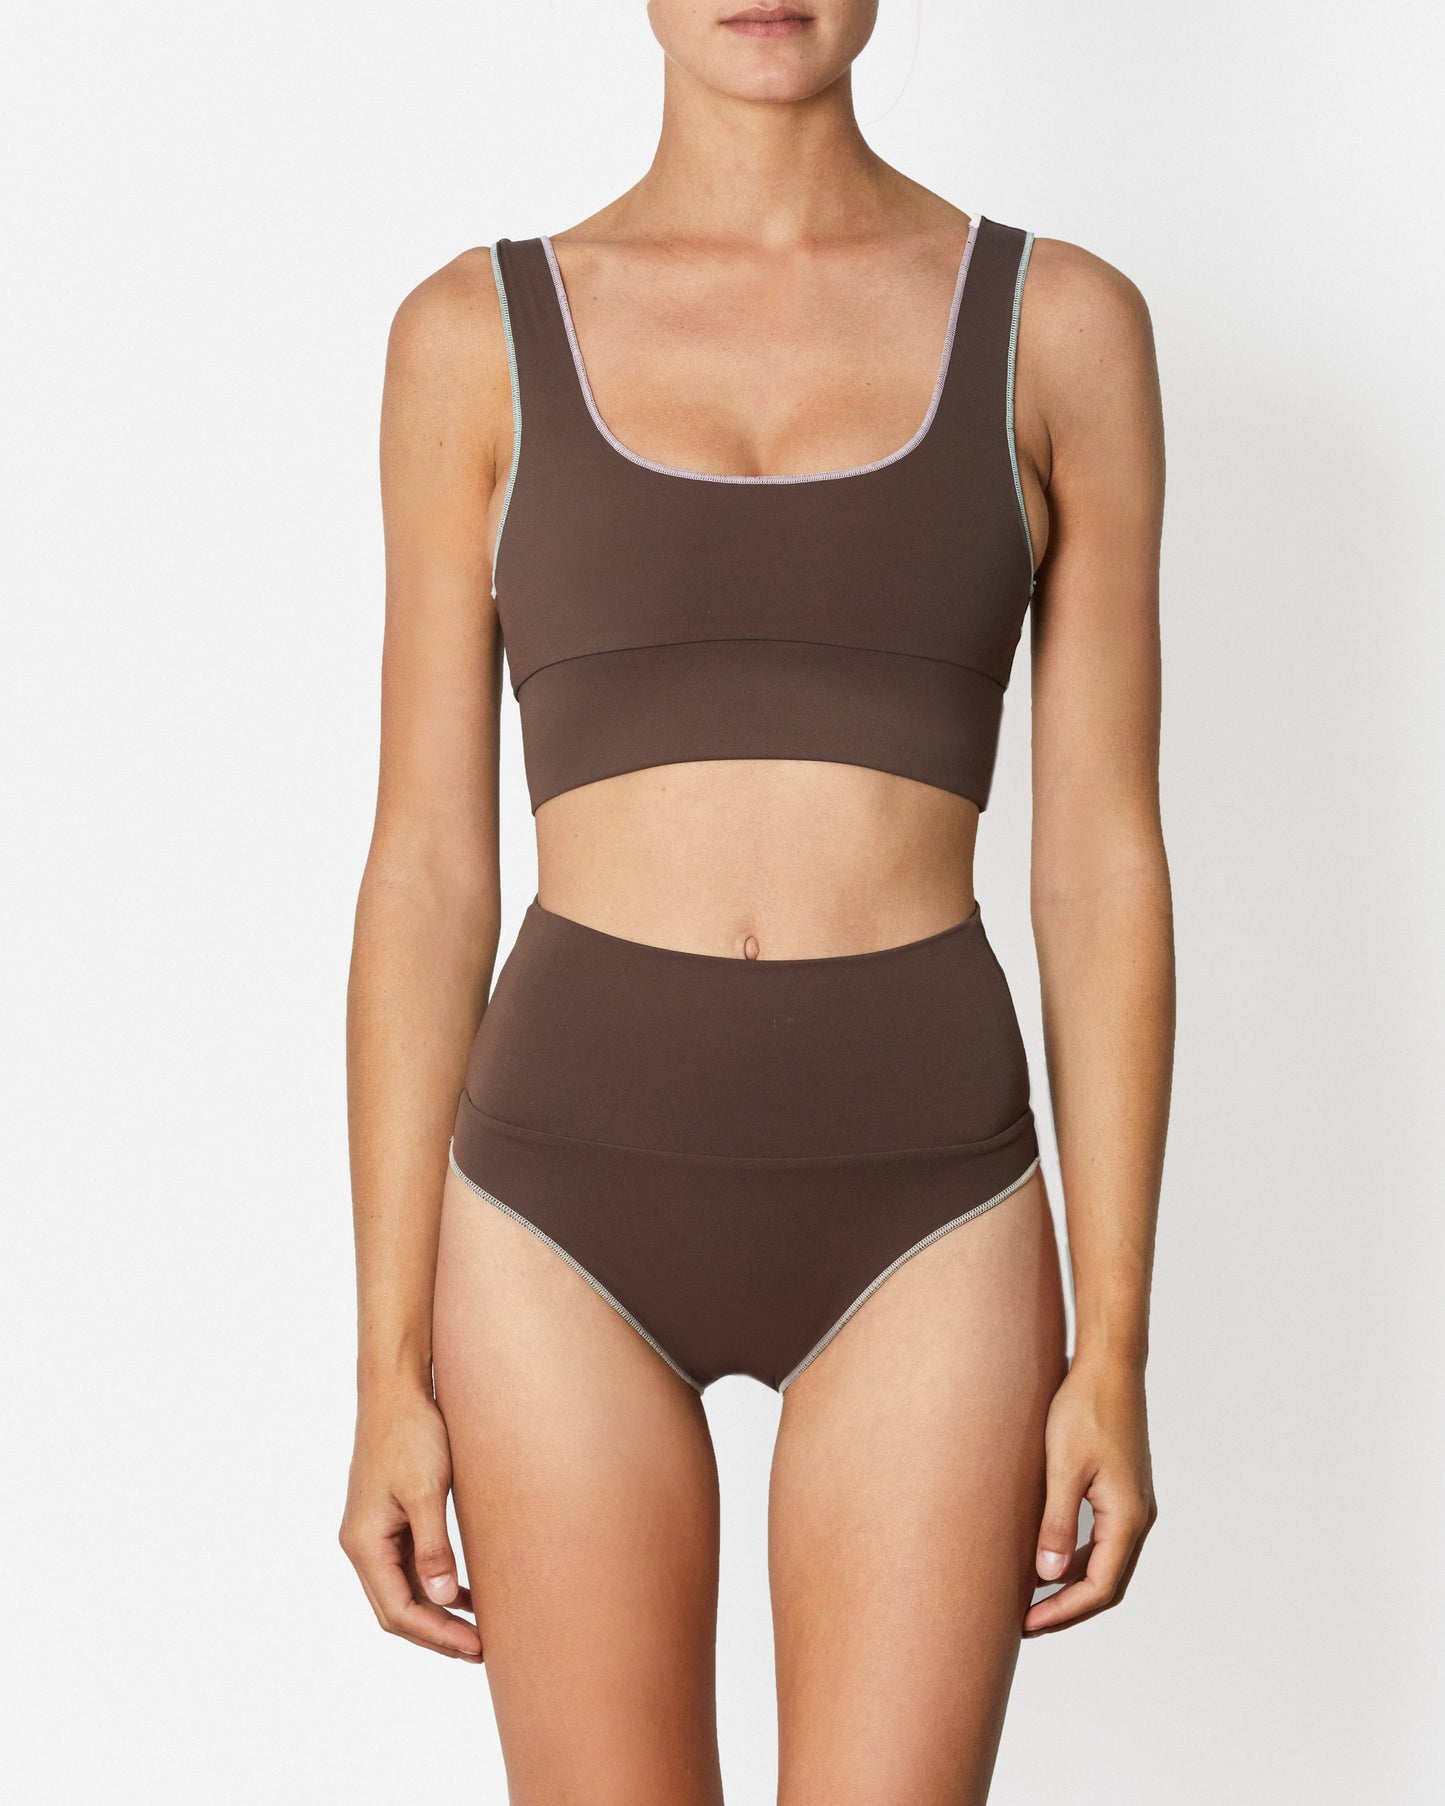 On body front of the Contour Crop Top - Fudgesicle